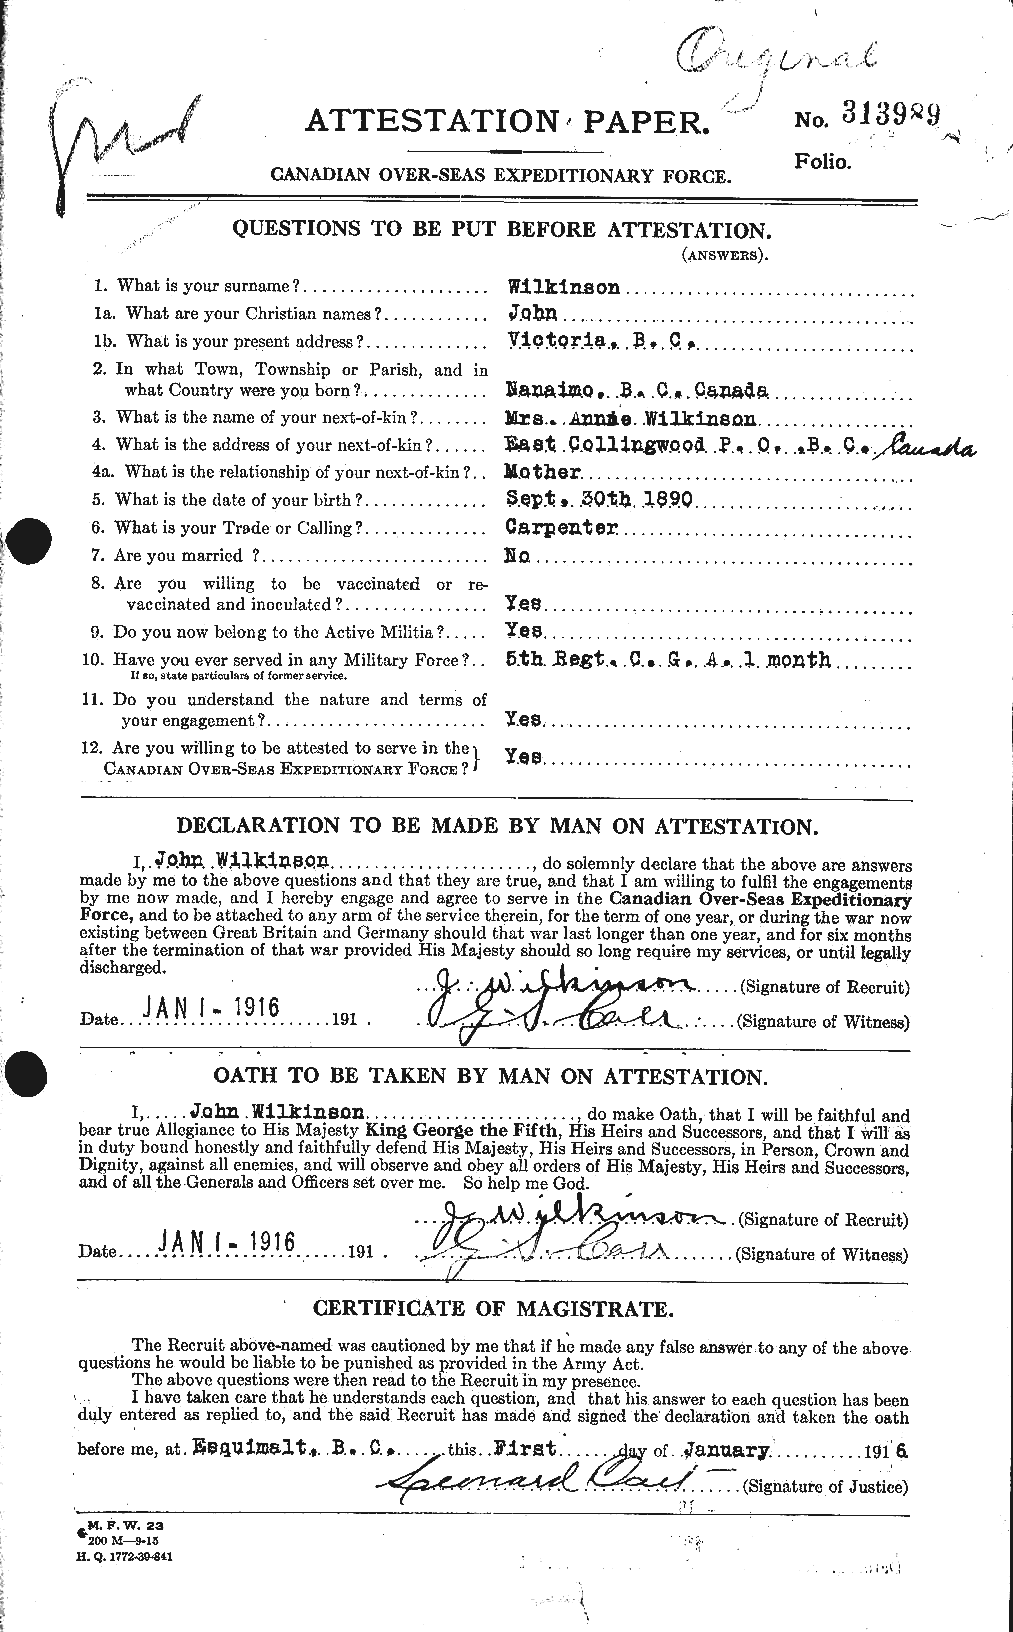 Personnel Records of the First World War - CEF 673321a